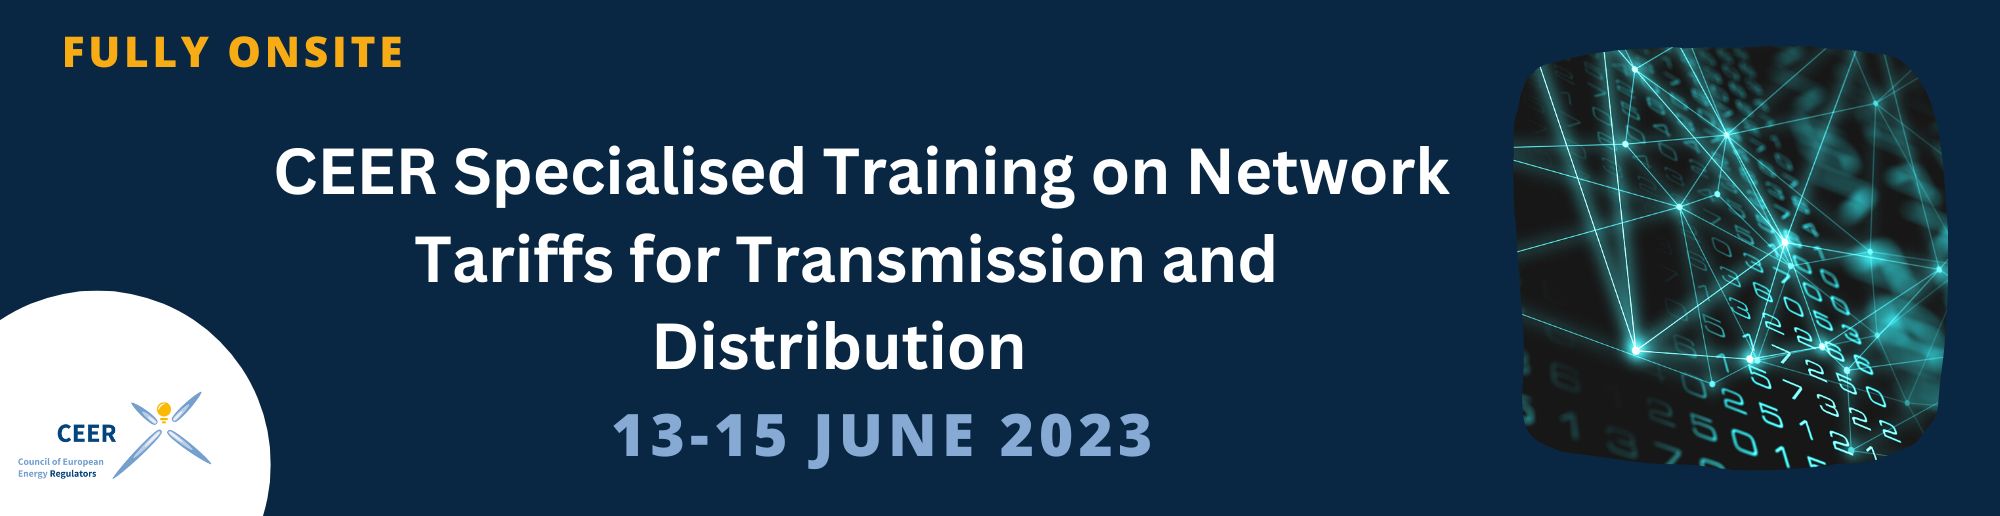 Specialised Training on Network Tariffs for Transmission and Distribution 